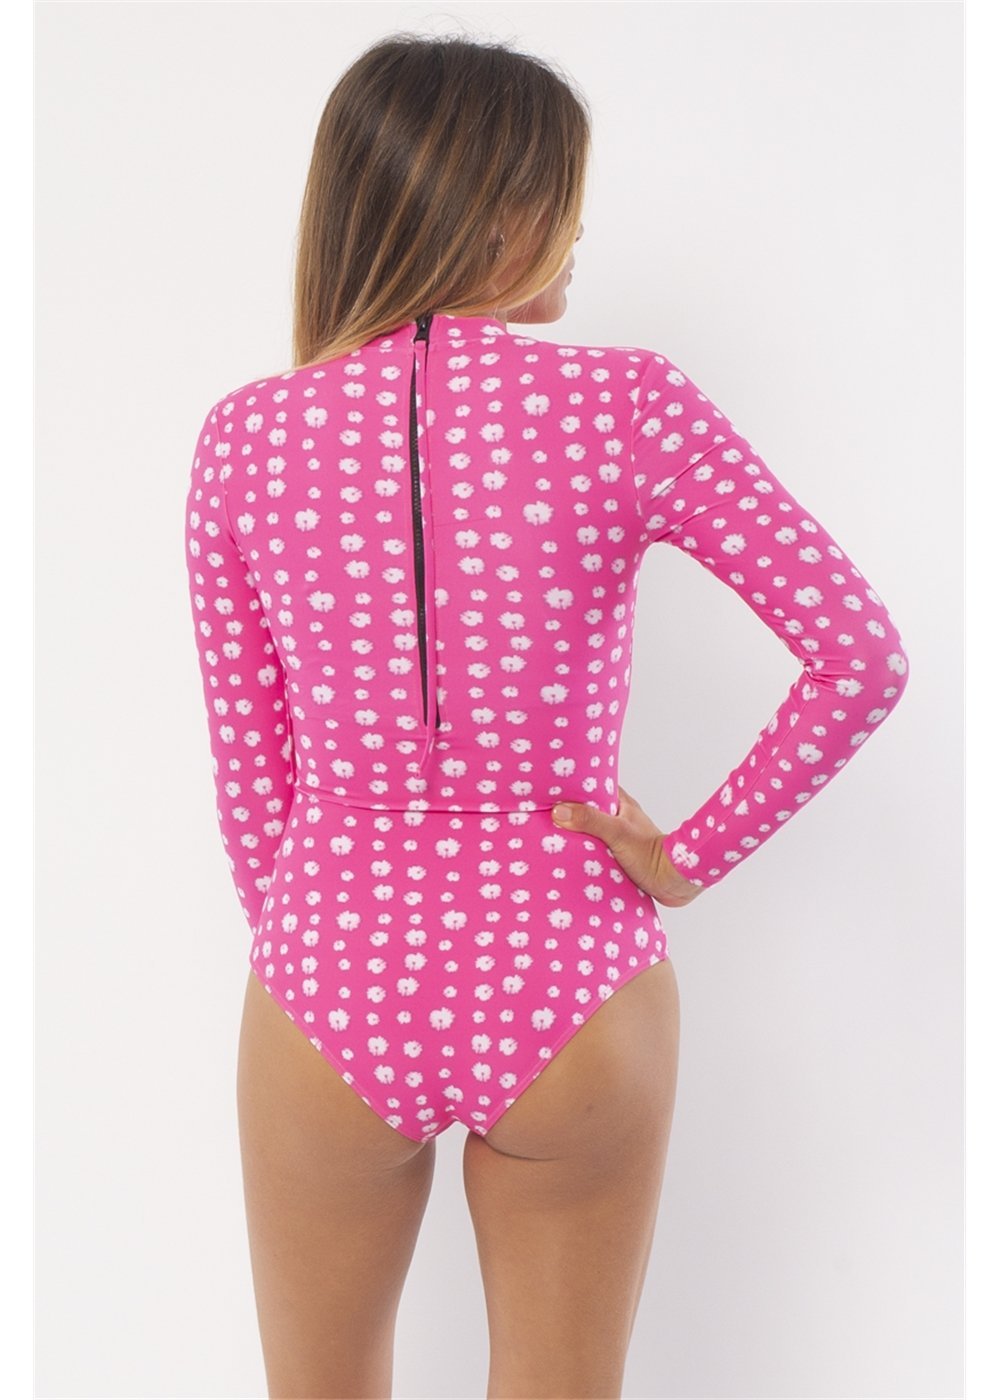 SISSTREVOLUTION NUI L/S ONE PIECE - The Surf Warehouse